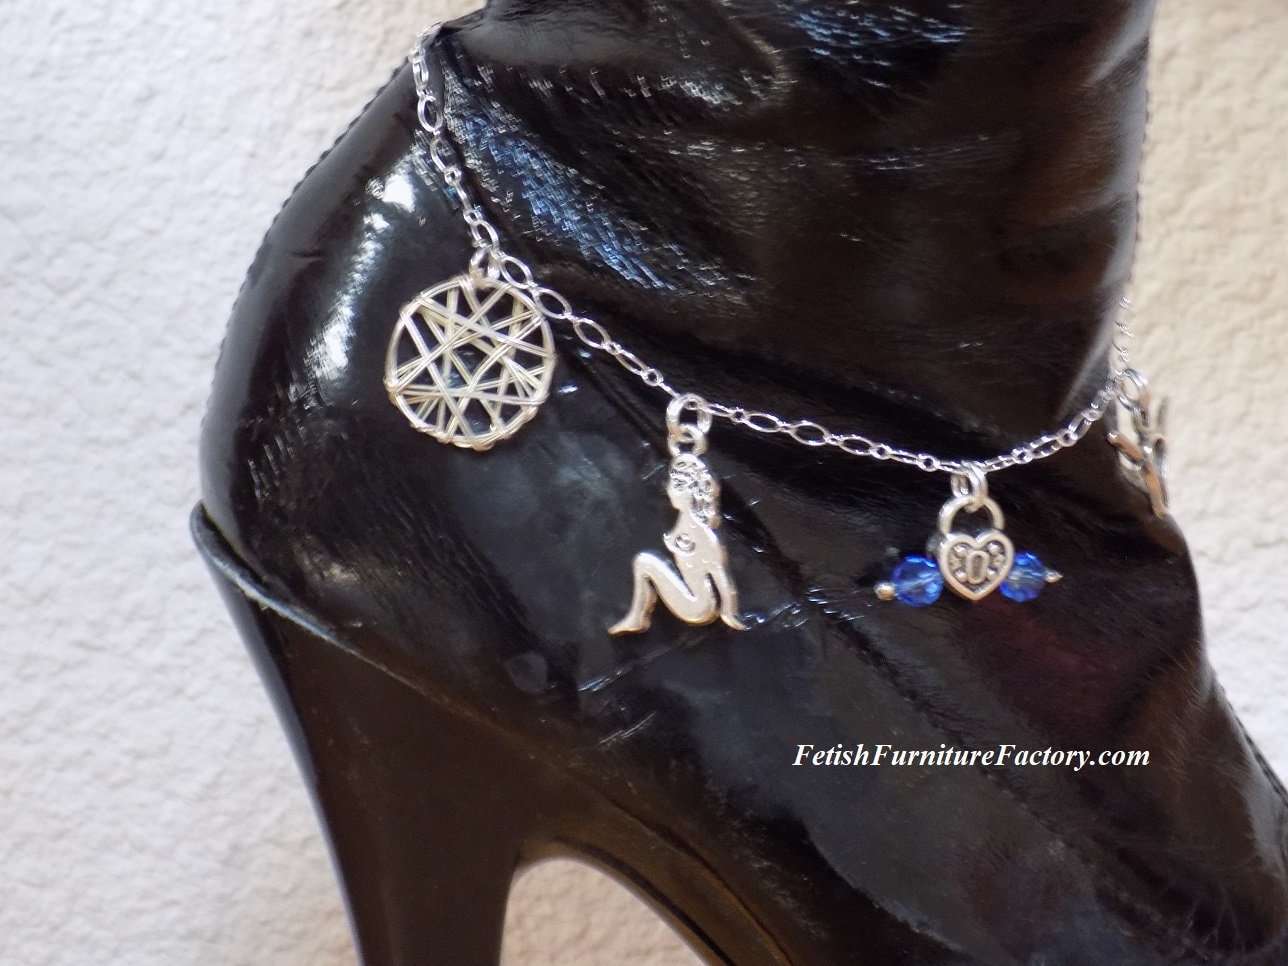 Mature Hotwife Anklet, Hotwife Charms, BDSM Jewelry, Cuckold, Sex Toys, Fetish, Kinky Jewelry, FemDom, Dungeon, Body Jewelry, Swingers, image